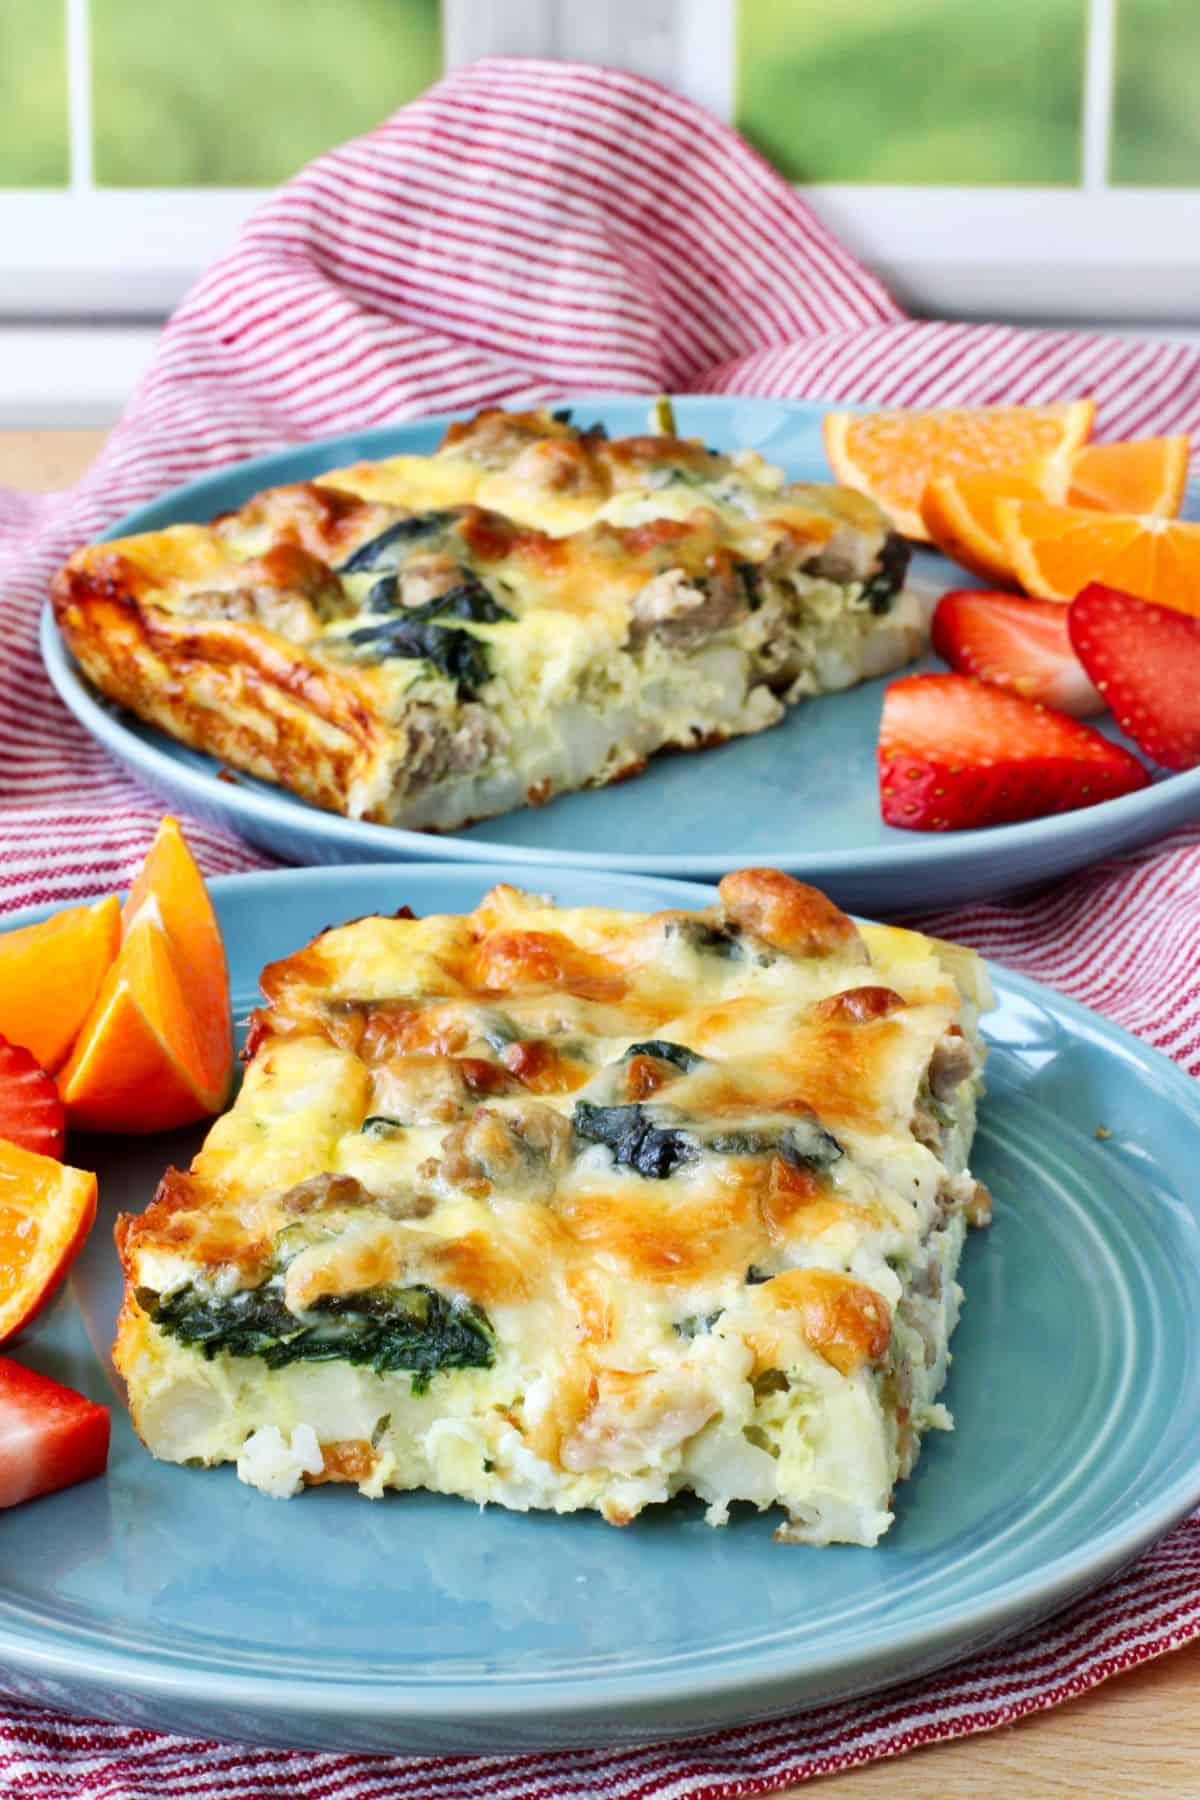 Sausage and Spinach Breakfast Casserole on blue plates.